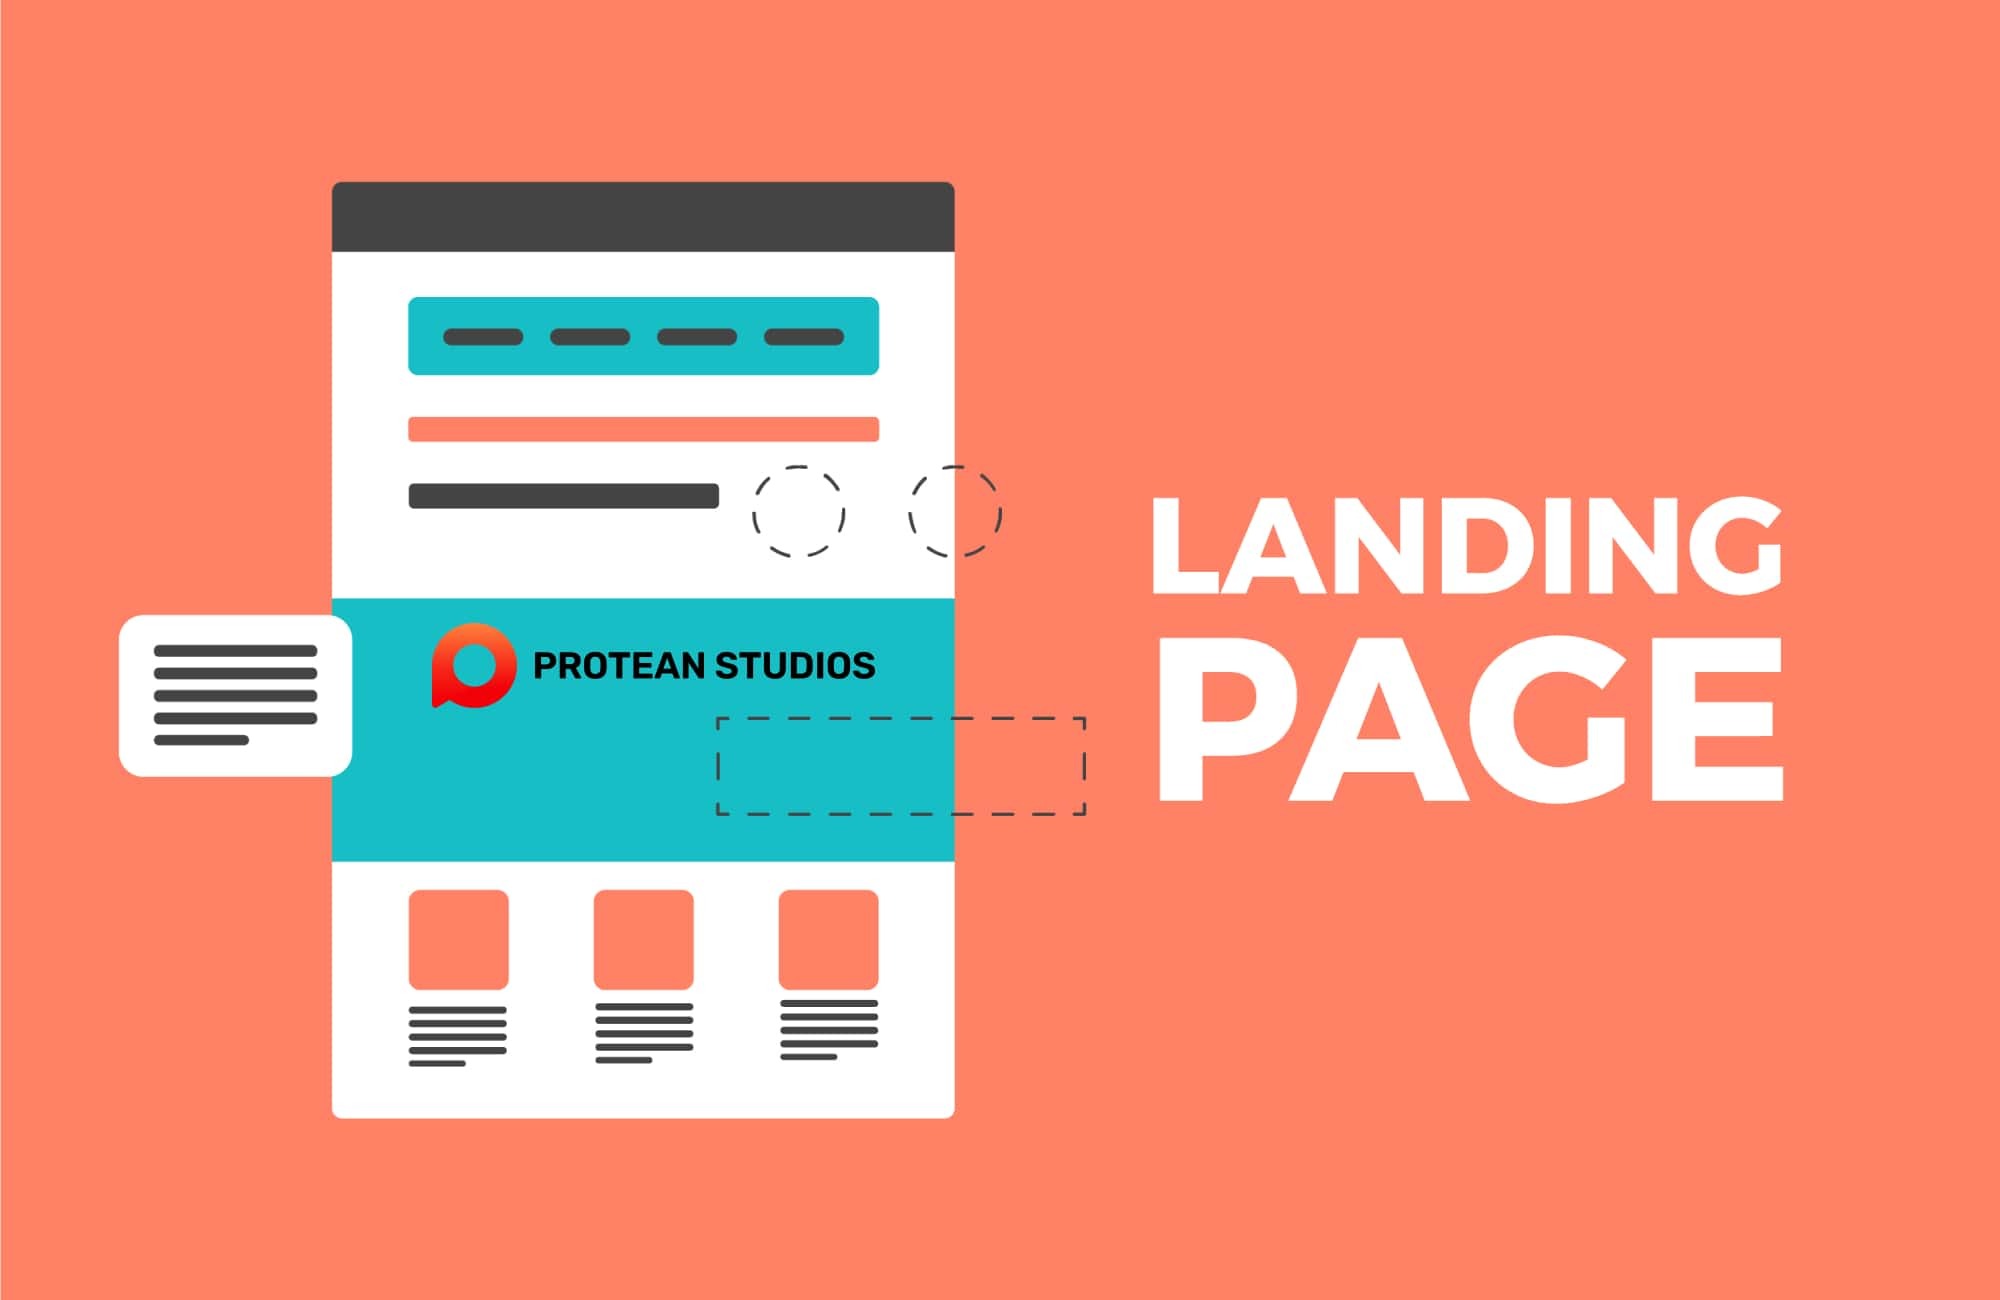 Using landing page to maintain interactions